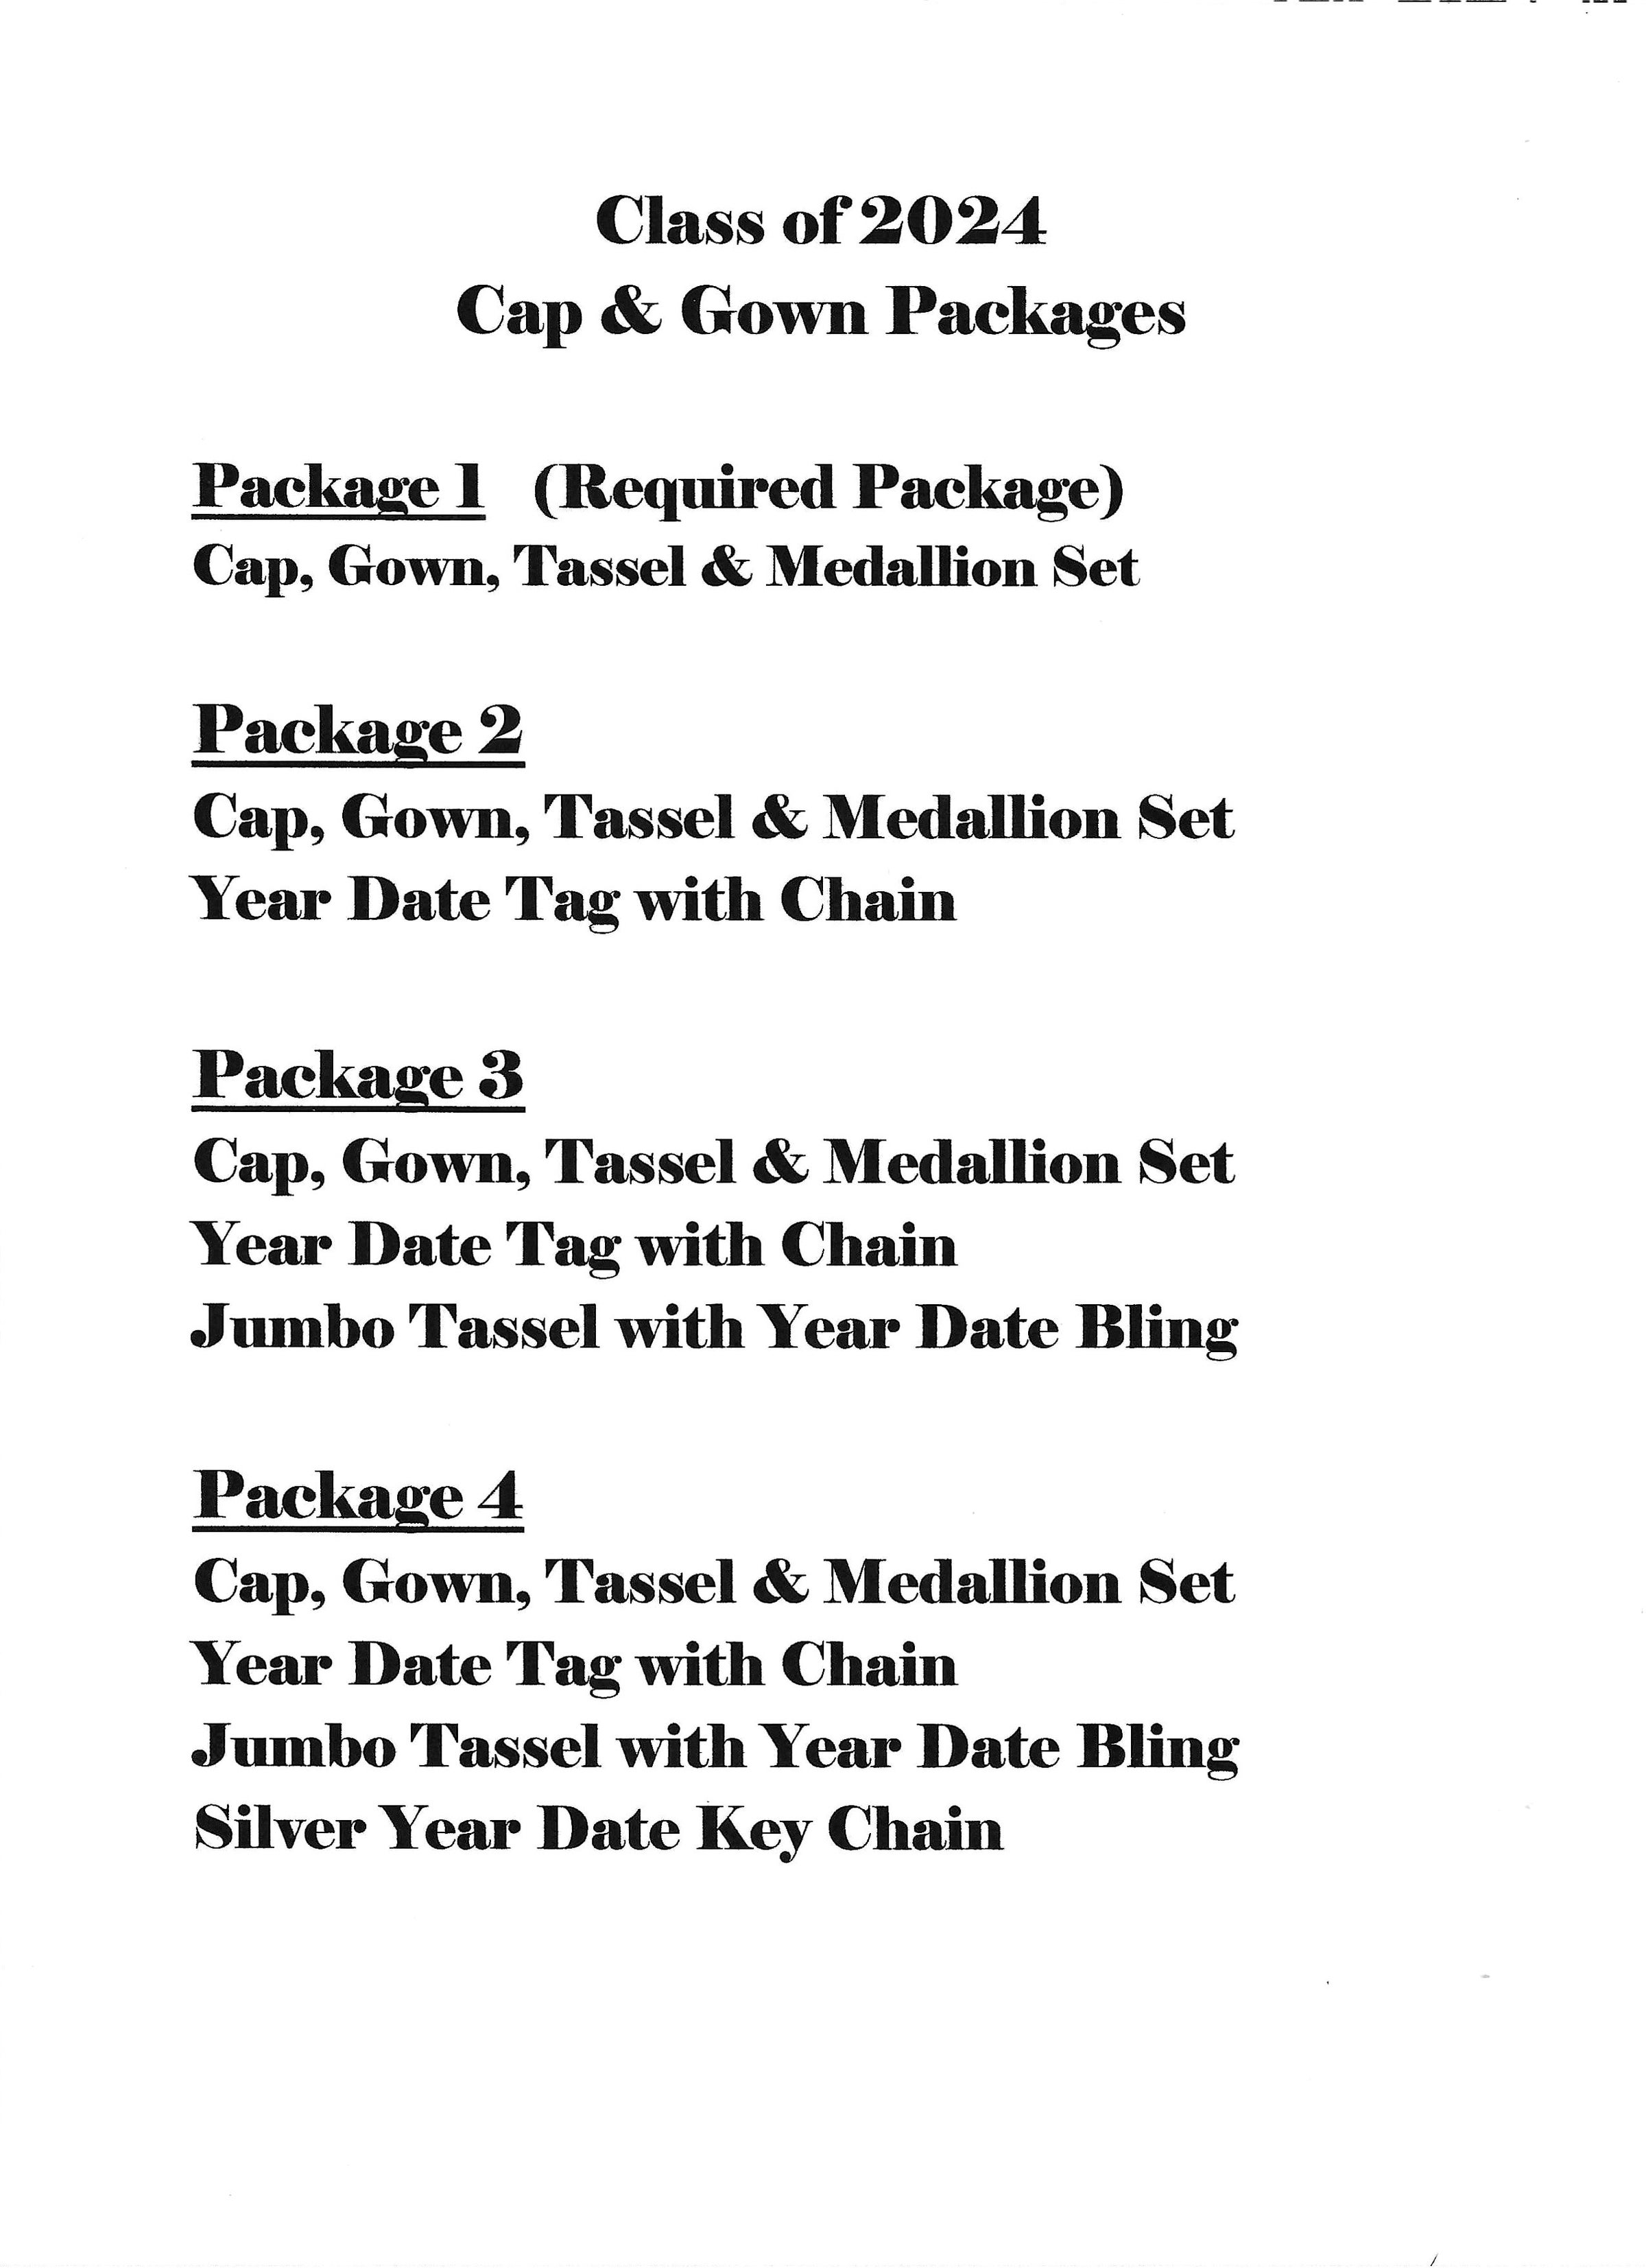 Proviso West High School Cap & Gown Packages